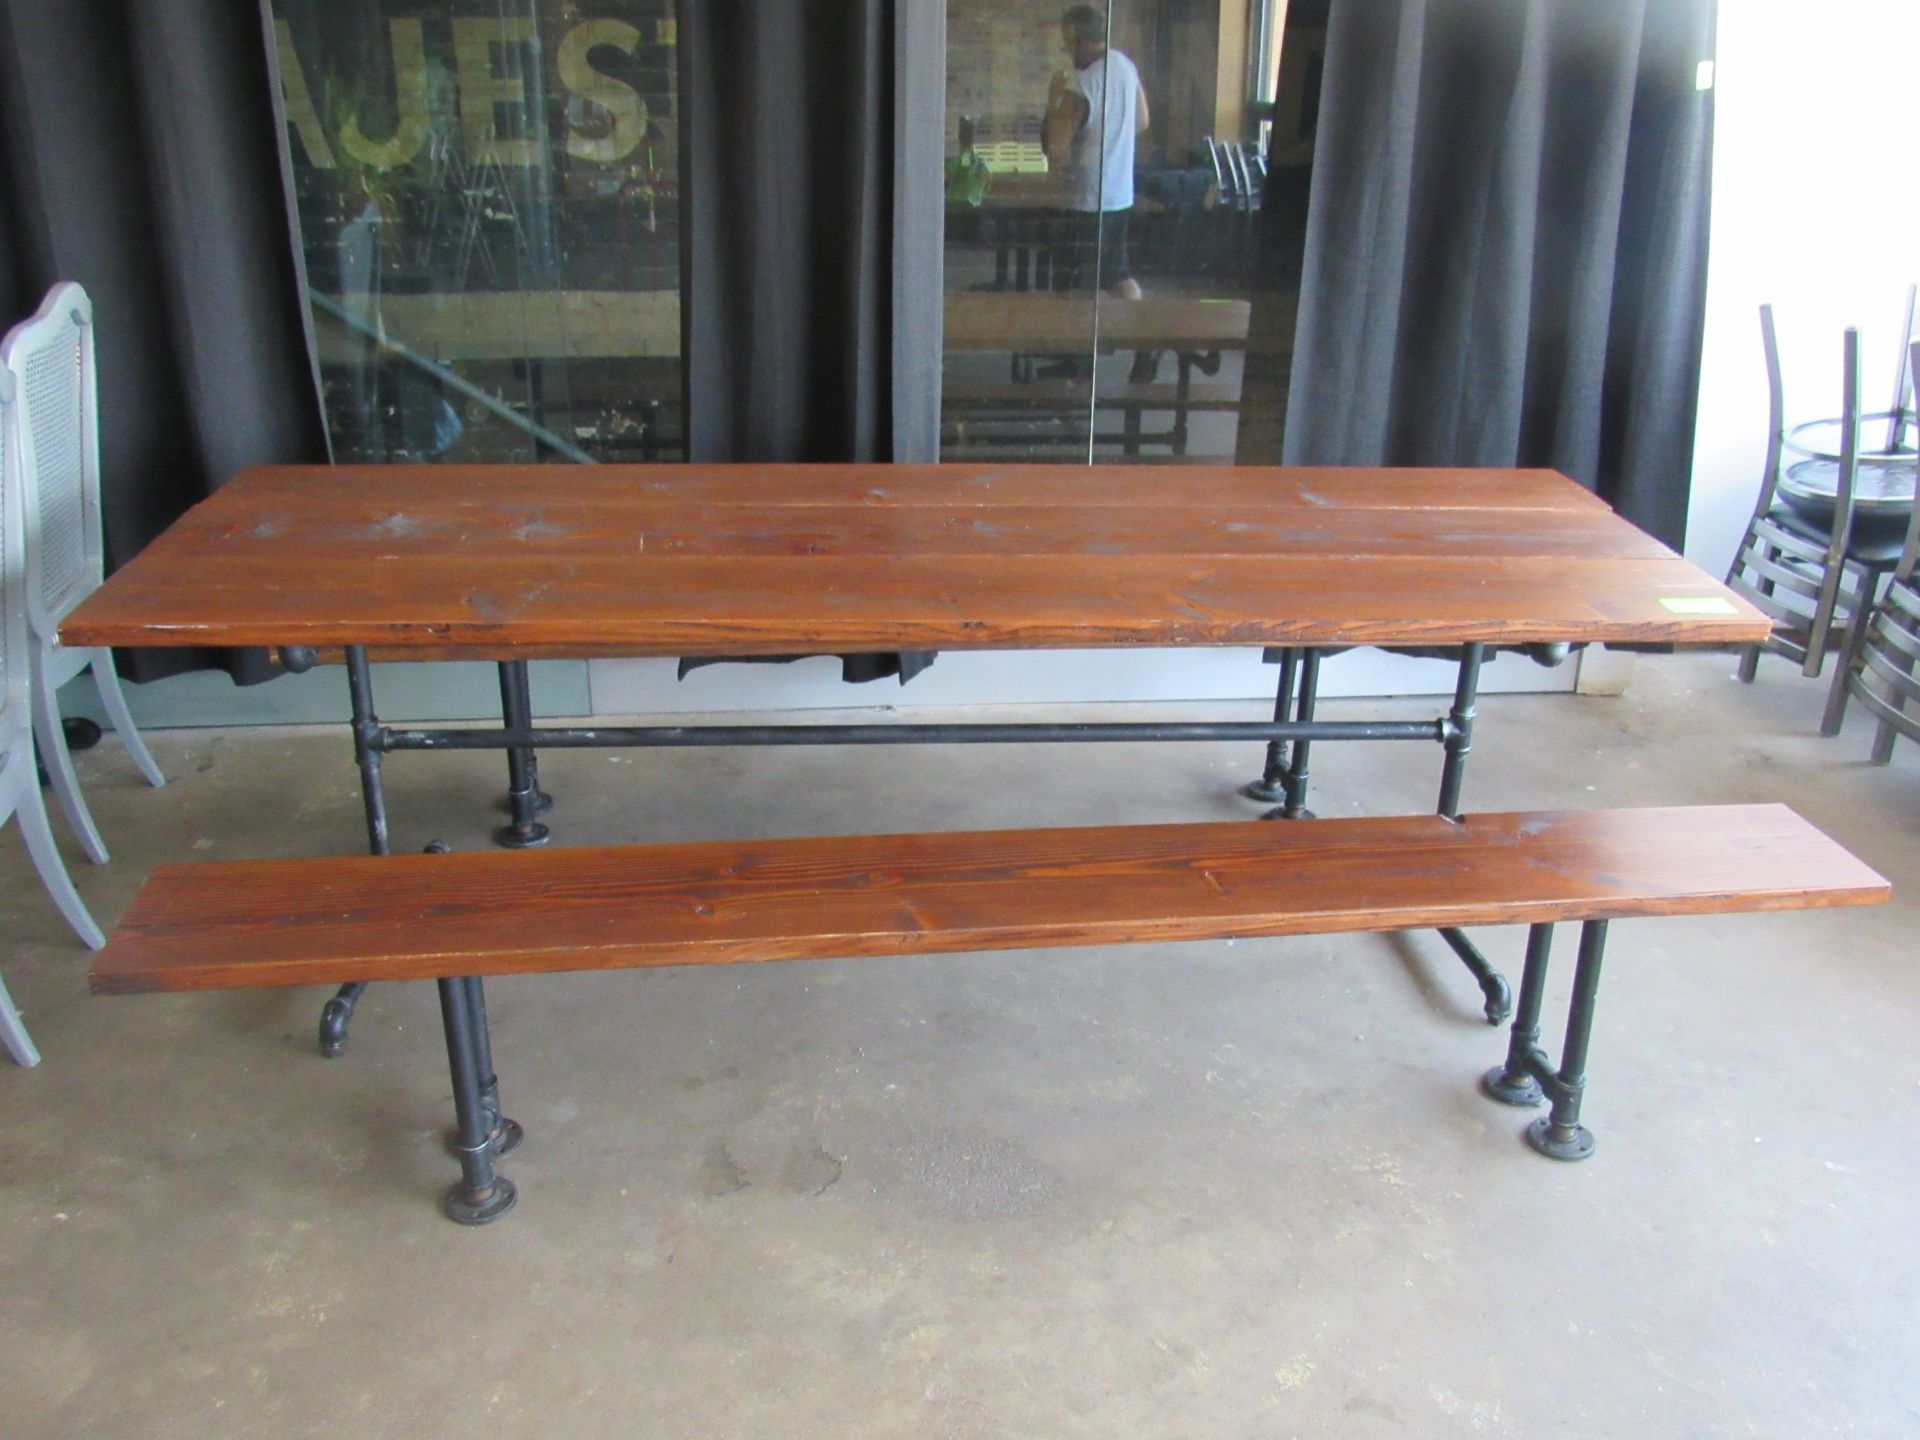 LOT OF: 8' TABLE WITH 2 BENCHES